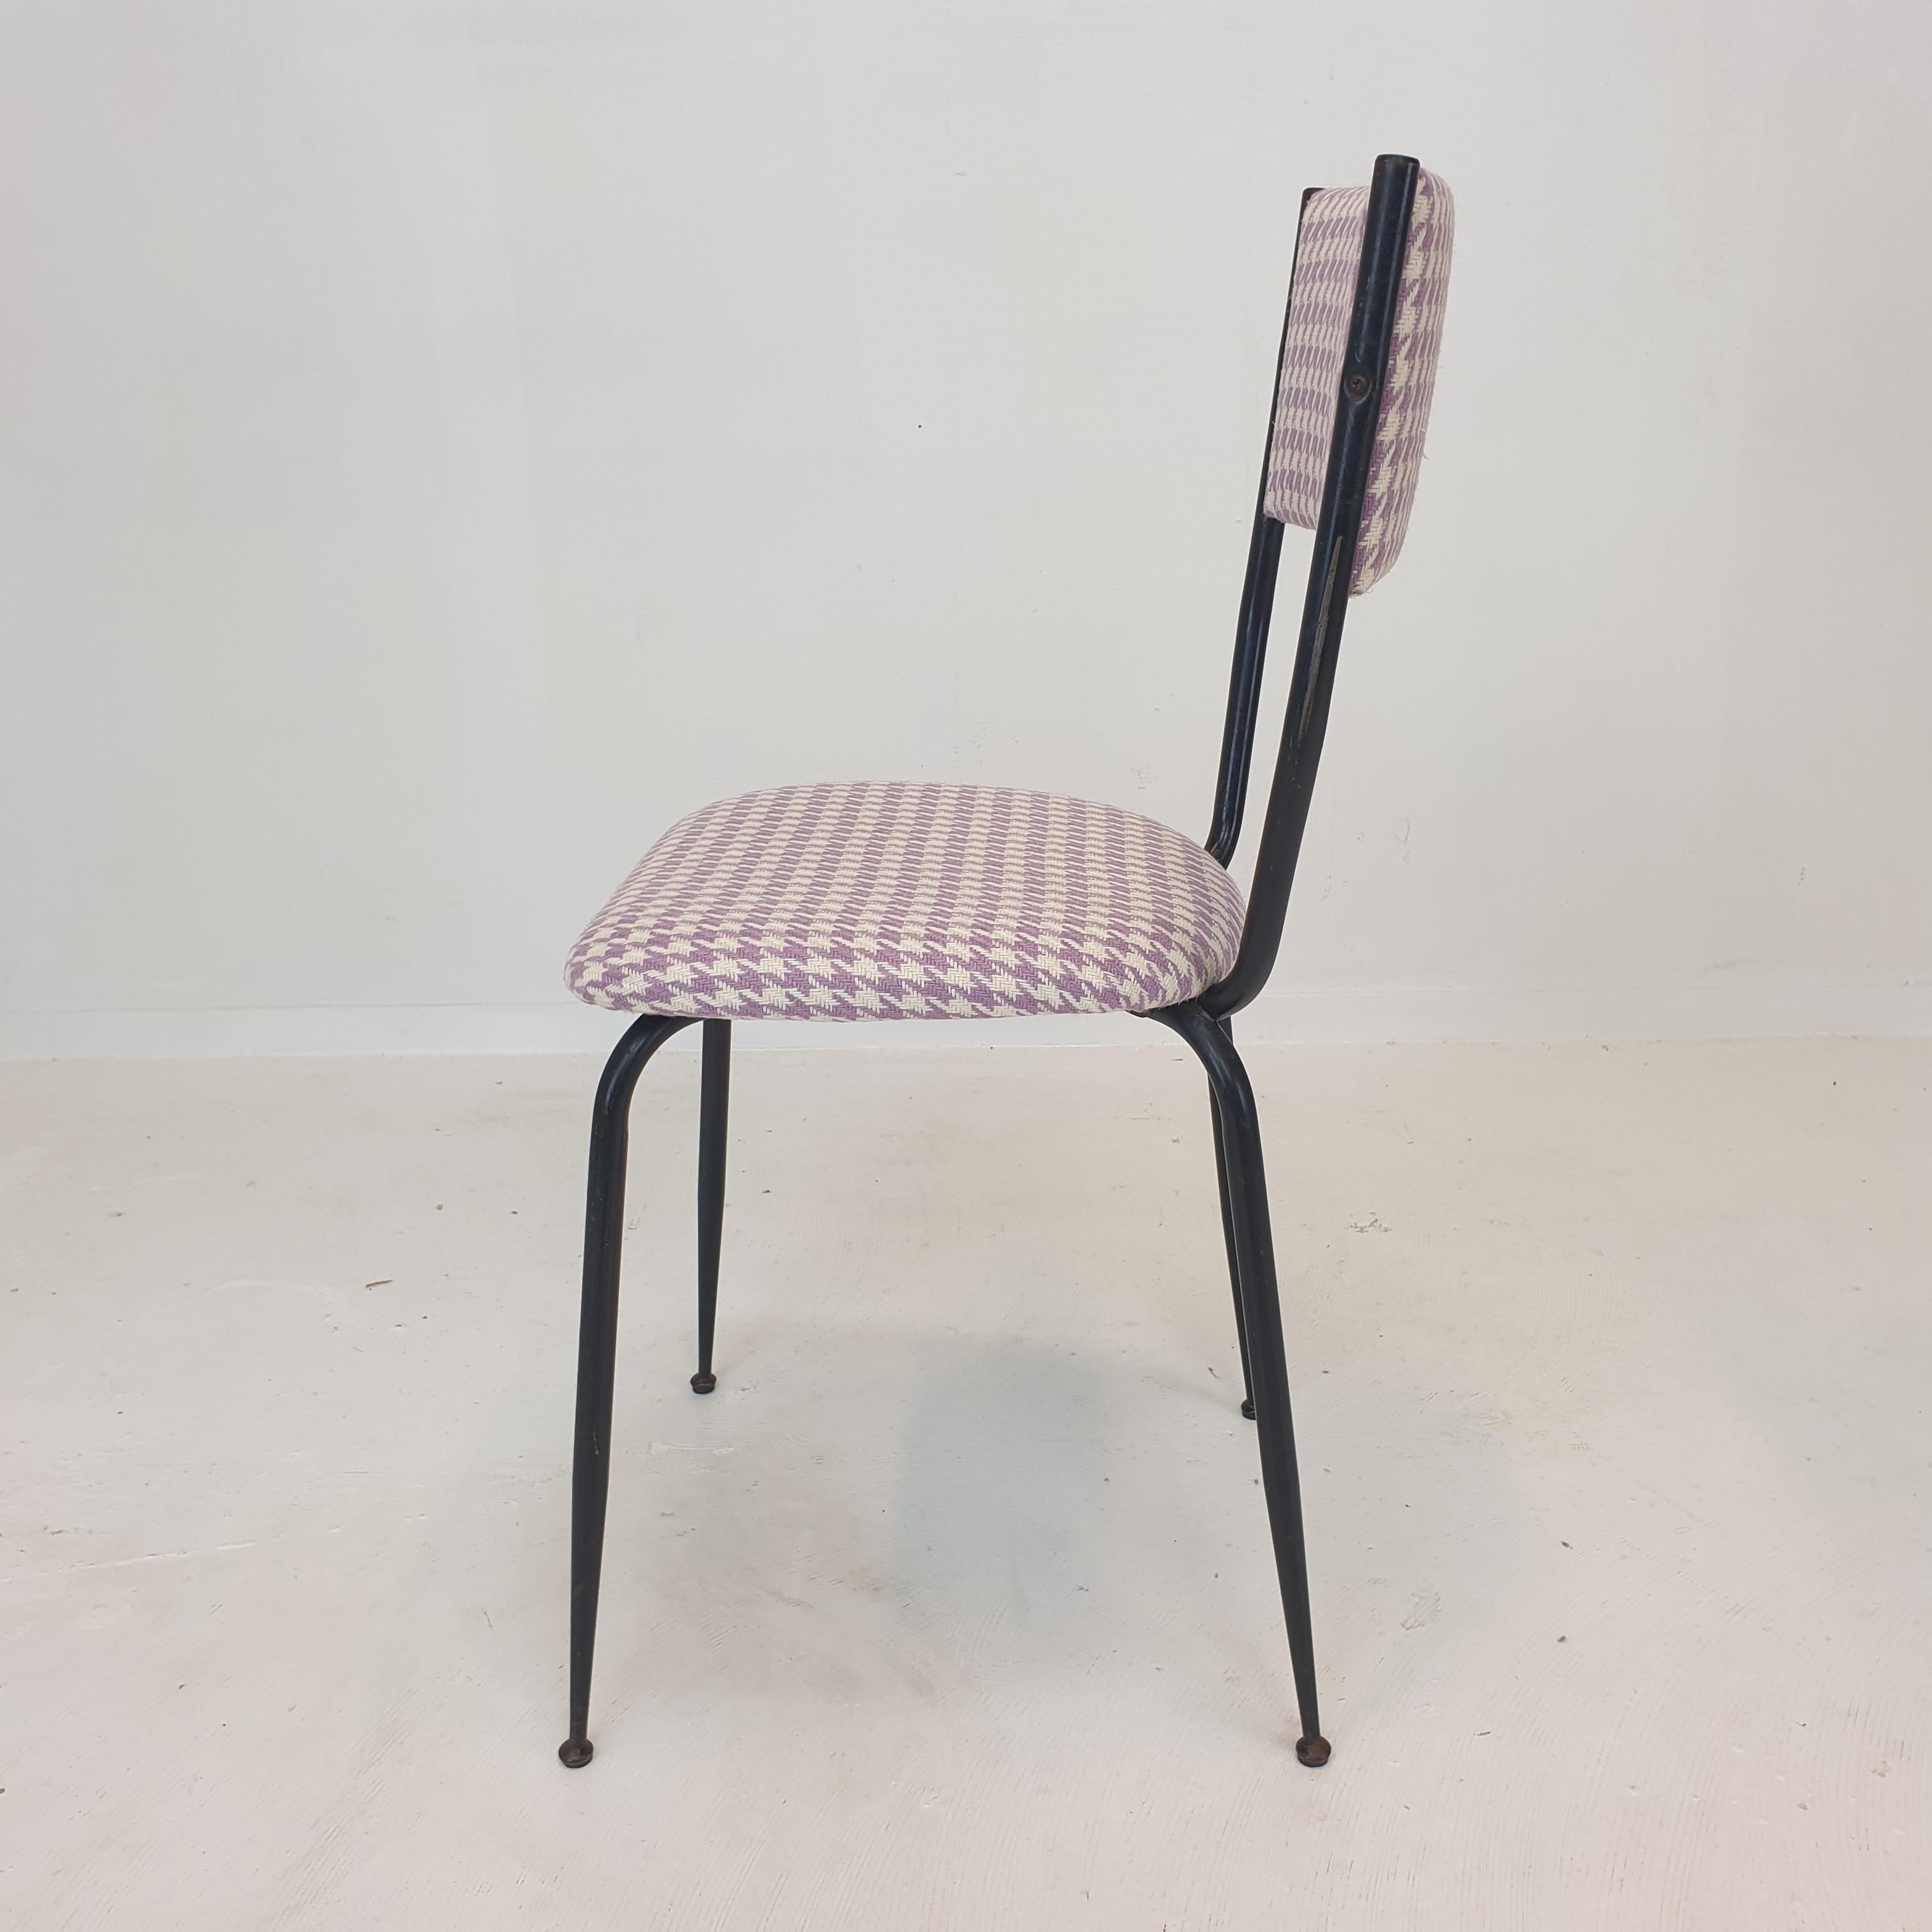 Steel Set of 4 Italian Metal Dining Chairs, 1960's For Sale